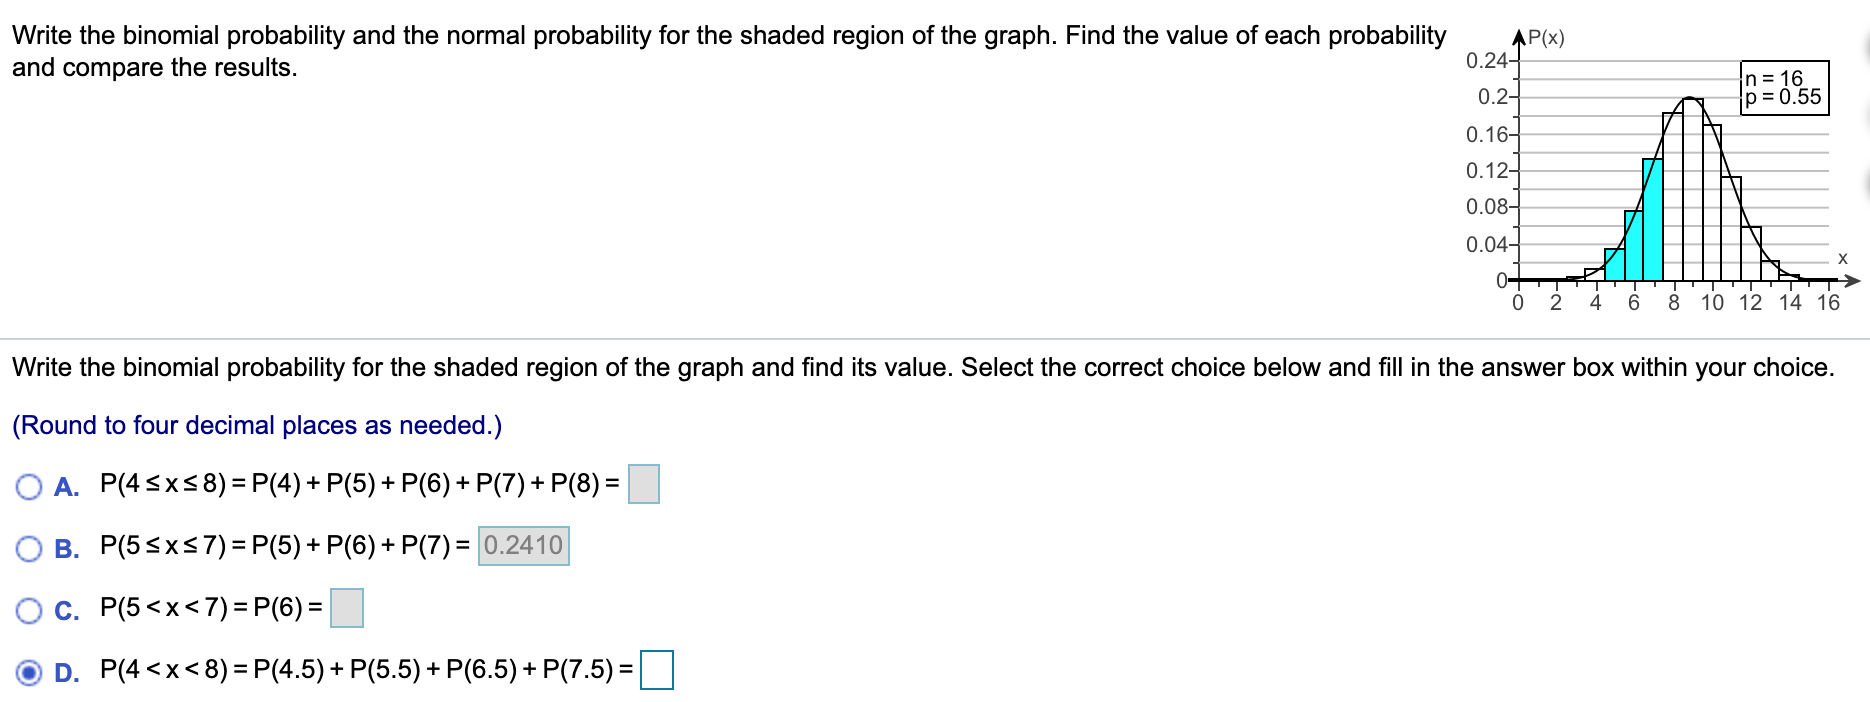 Write the binomial probability and the normal probability for the shaded region of the graph. Find the value of each probability
and compare the results.
AP(x)
0.24-
0.2-
n= 16
p = 0.55
0.16-
0.12-
0.08-
0.04-
0+
2
4
6.
8 10 12 14 16
Write the binomial probability for the shaded region of the graph and find its value. Select the correct choice below and fill in the answer box within your choice.
(Round to four decimal places as needed.)
O A. P(4sx58) = P(4) + P(5) + P(6) + P(7) + P(8) =
O B. P(5sxs 7) = P(5) + P(6) + P(7) = 0.2410
c. P(5 <x<7) = P(6) =
D. P(4 <x< 8) = P(4.5)+ P(5.5) + P(6.5) + P(7.5) =
%3D
